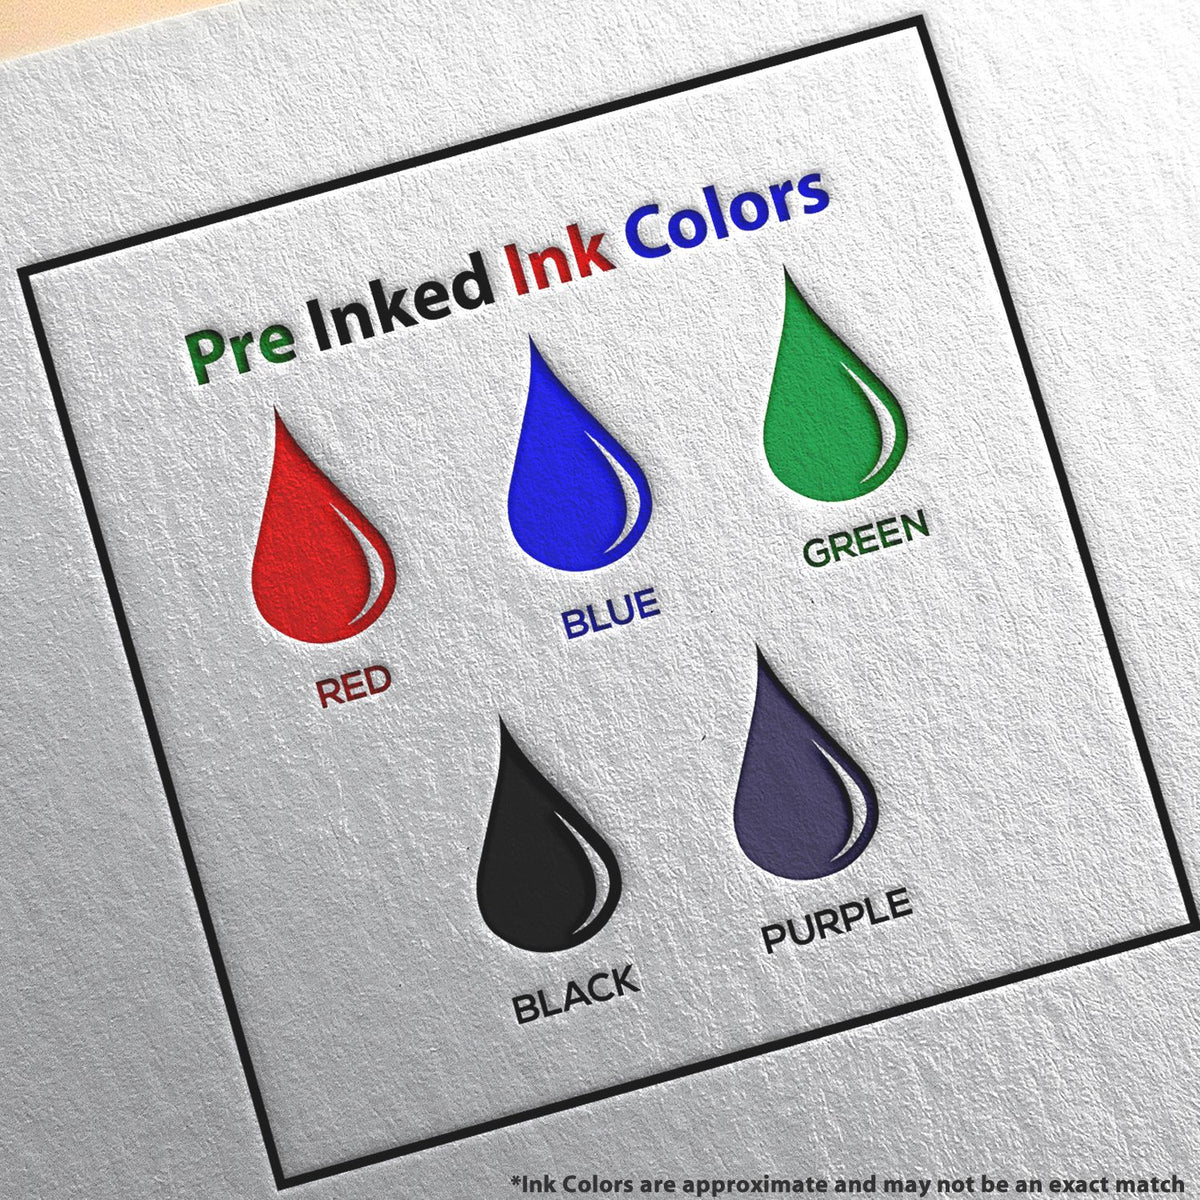 A picture showing the different ink colors or hues available for the Premium MaxLight Pre-Inked Montana Landscape Architectural Stamp product.